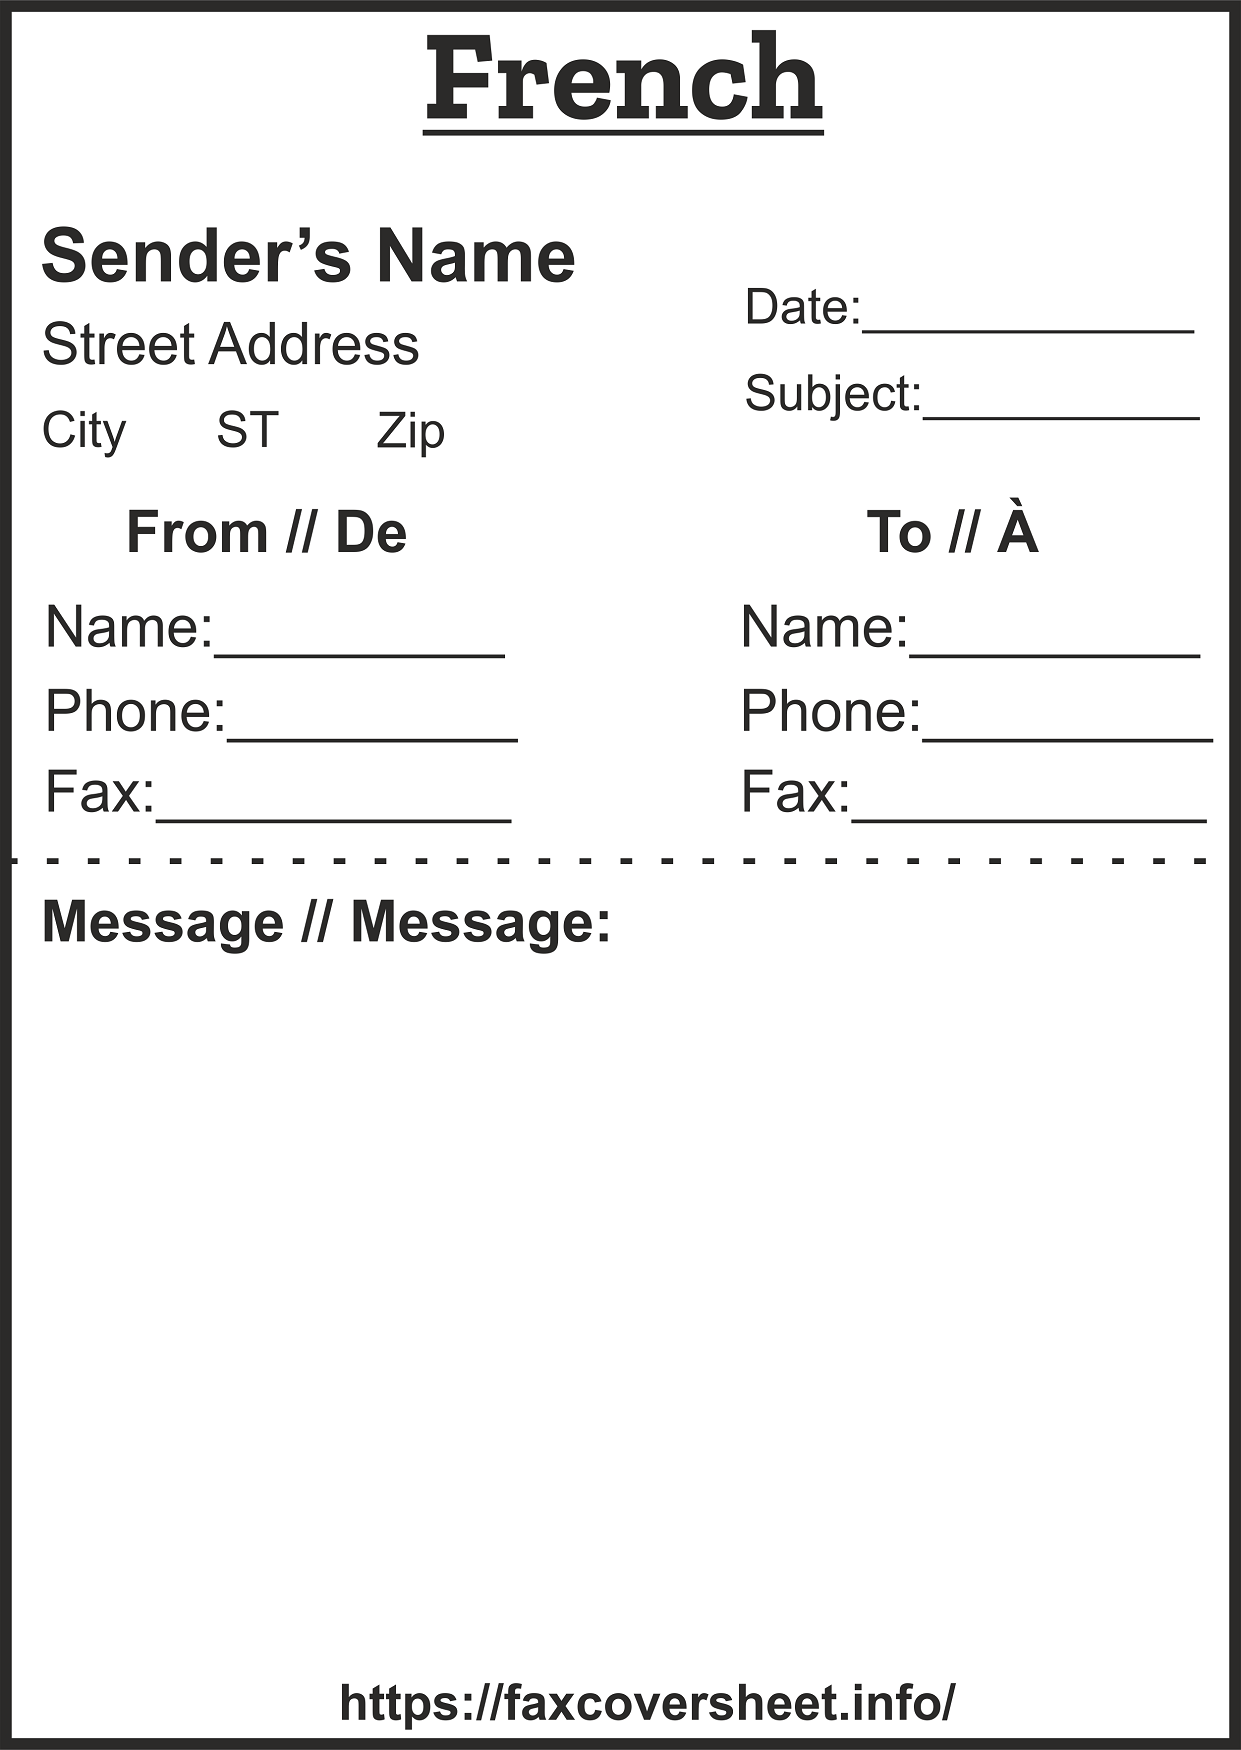 Free French Fax Cover Sheet